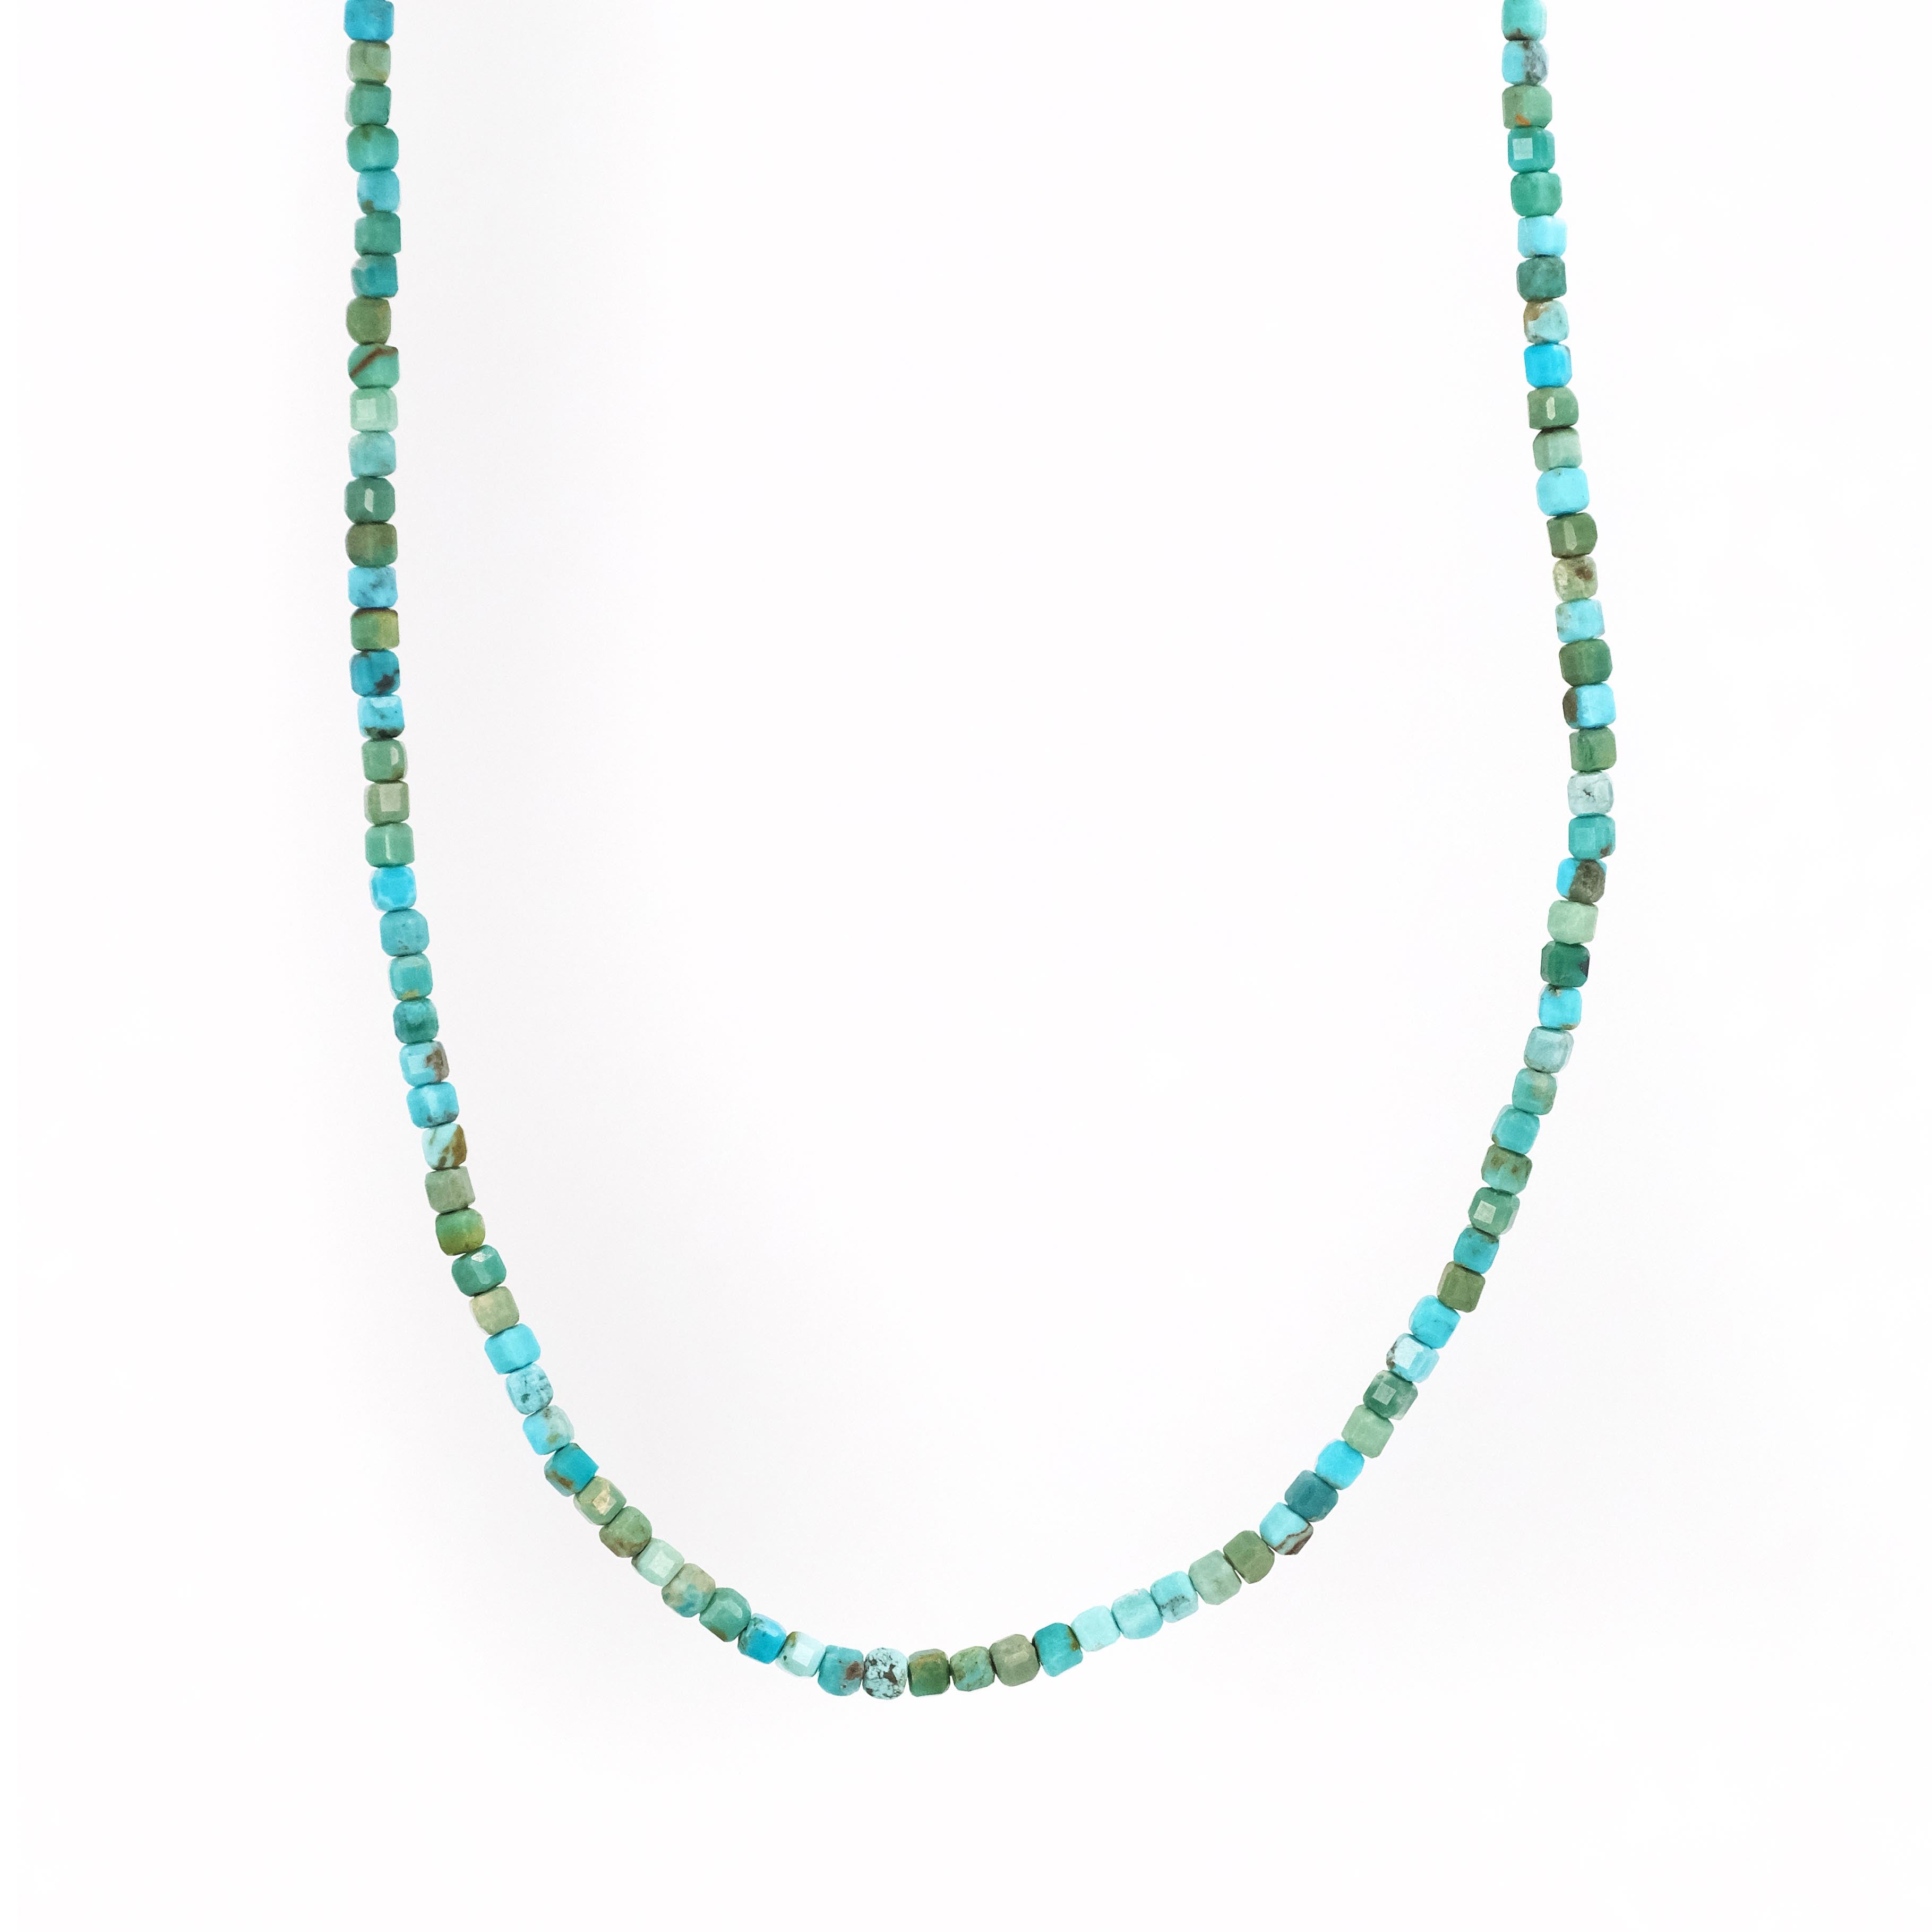 Tranquil Turquoise Necklace